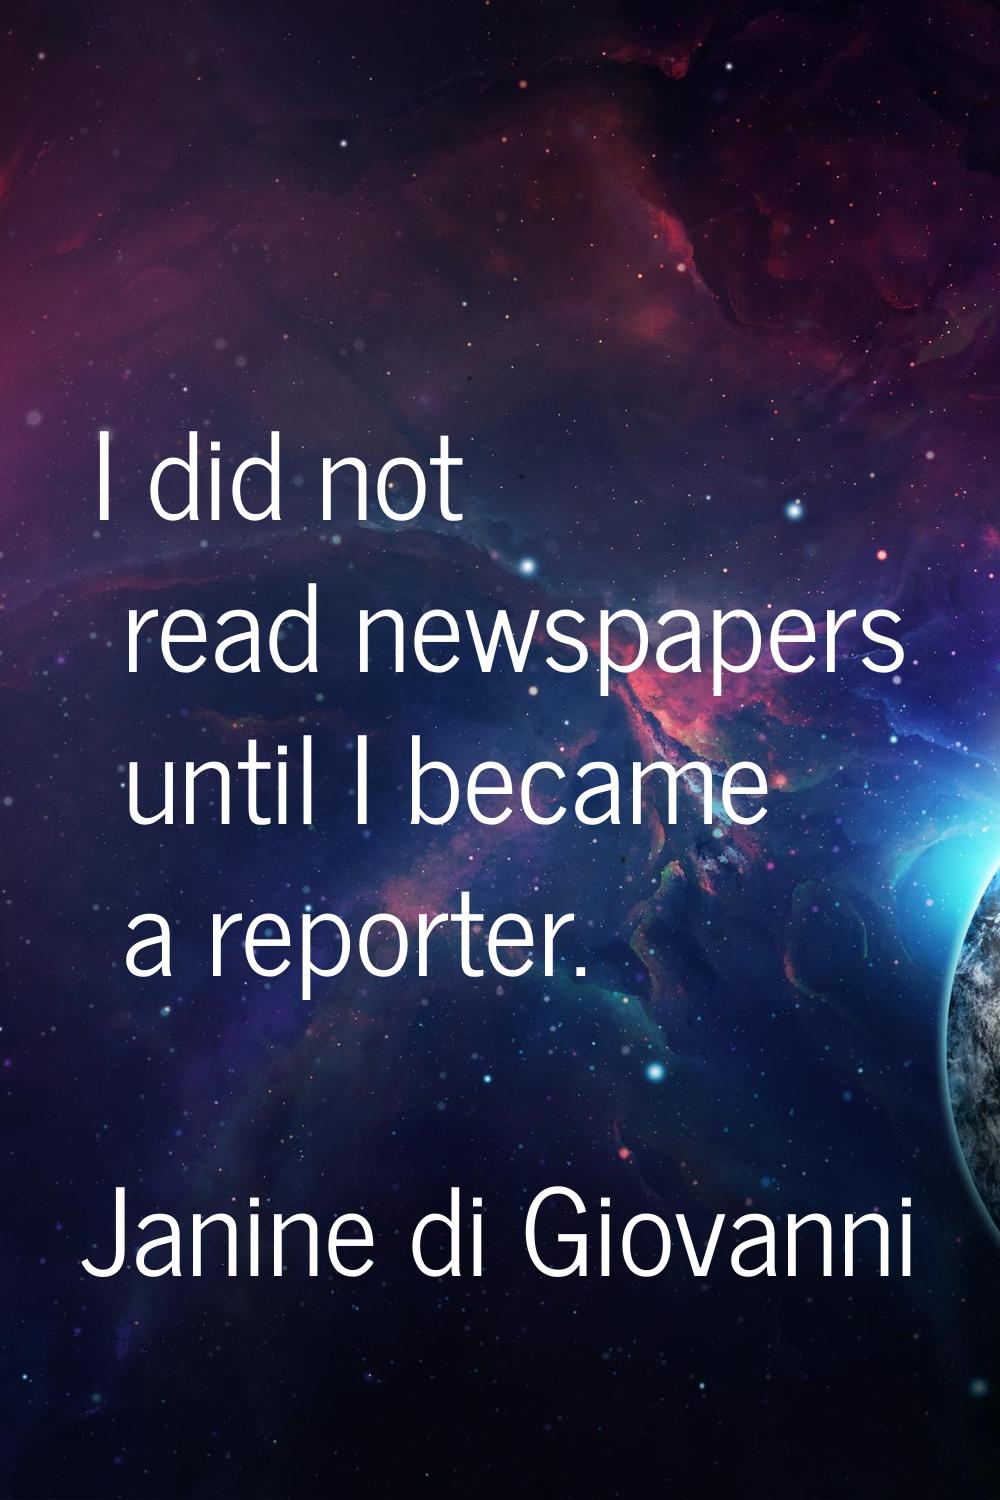 I did not read newspapers until I became a reporter.